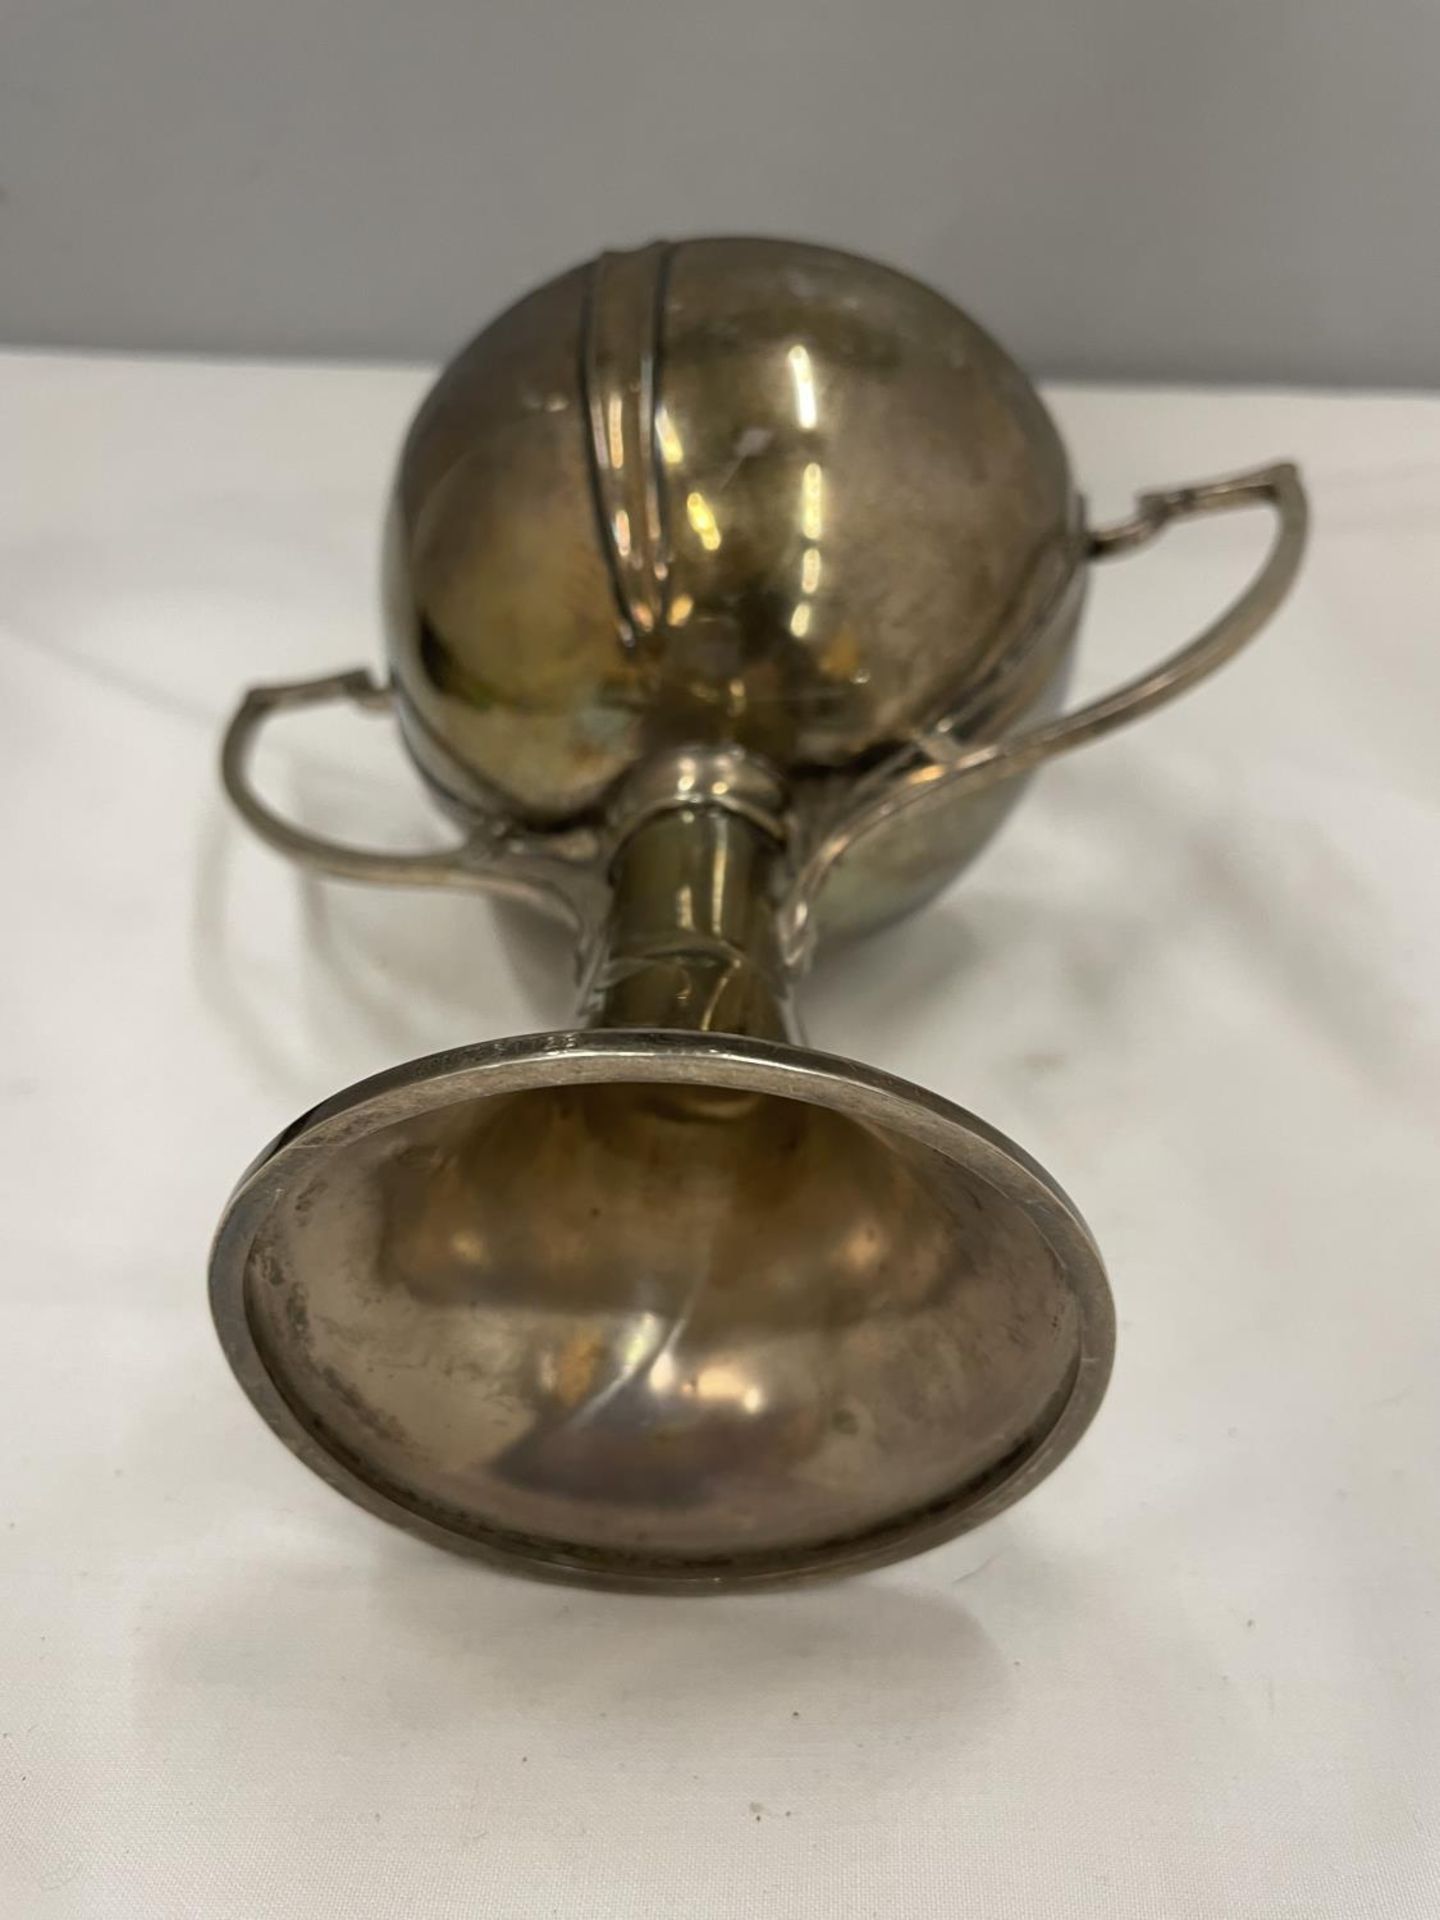 A HALLMARKED LONDON SILVER TWIN HANDLED CUP GROSS WEIGHT 227 GRAMS ENGRAVED S V L H CAMP 1913 - Image 4 of 5